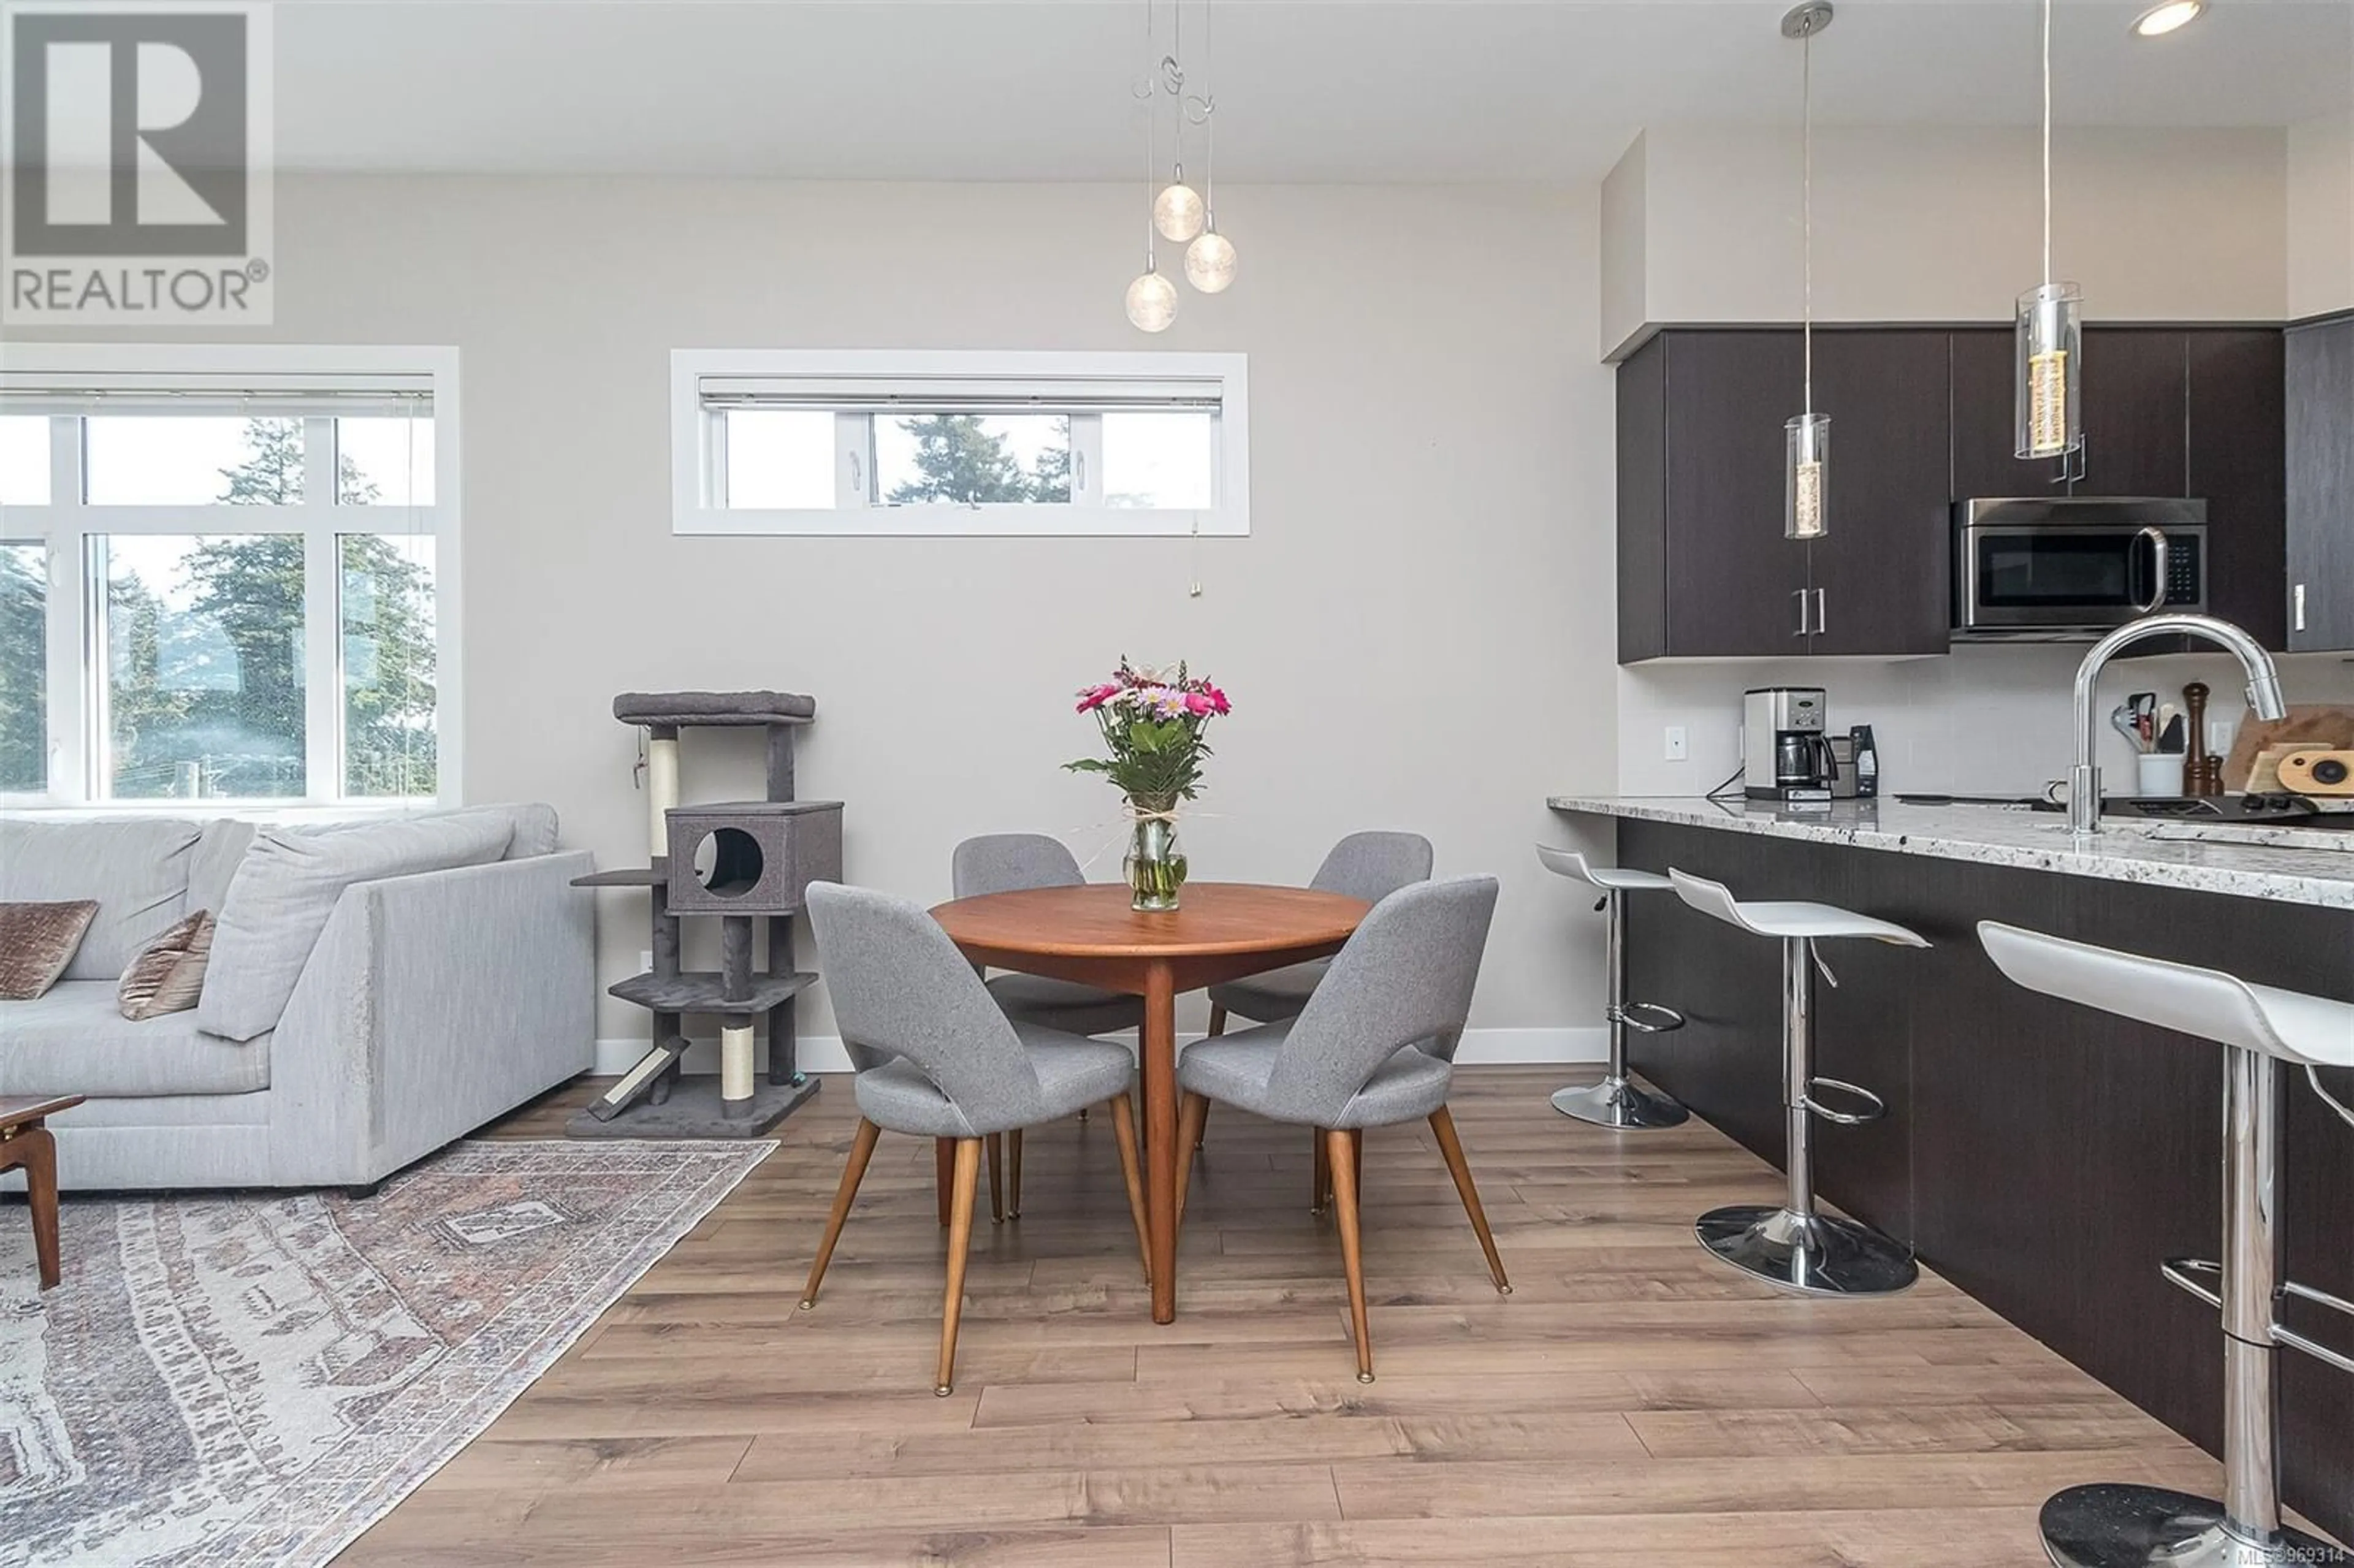 Contemporary kitchen for 408 2655 Sooke Rd, Langford British Columbia V9B1Y3